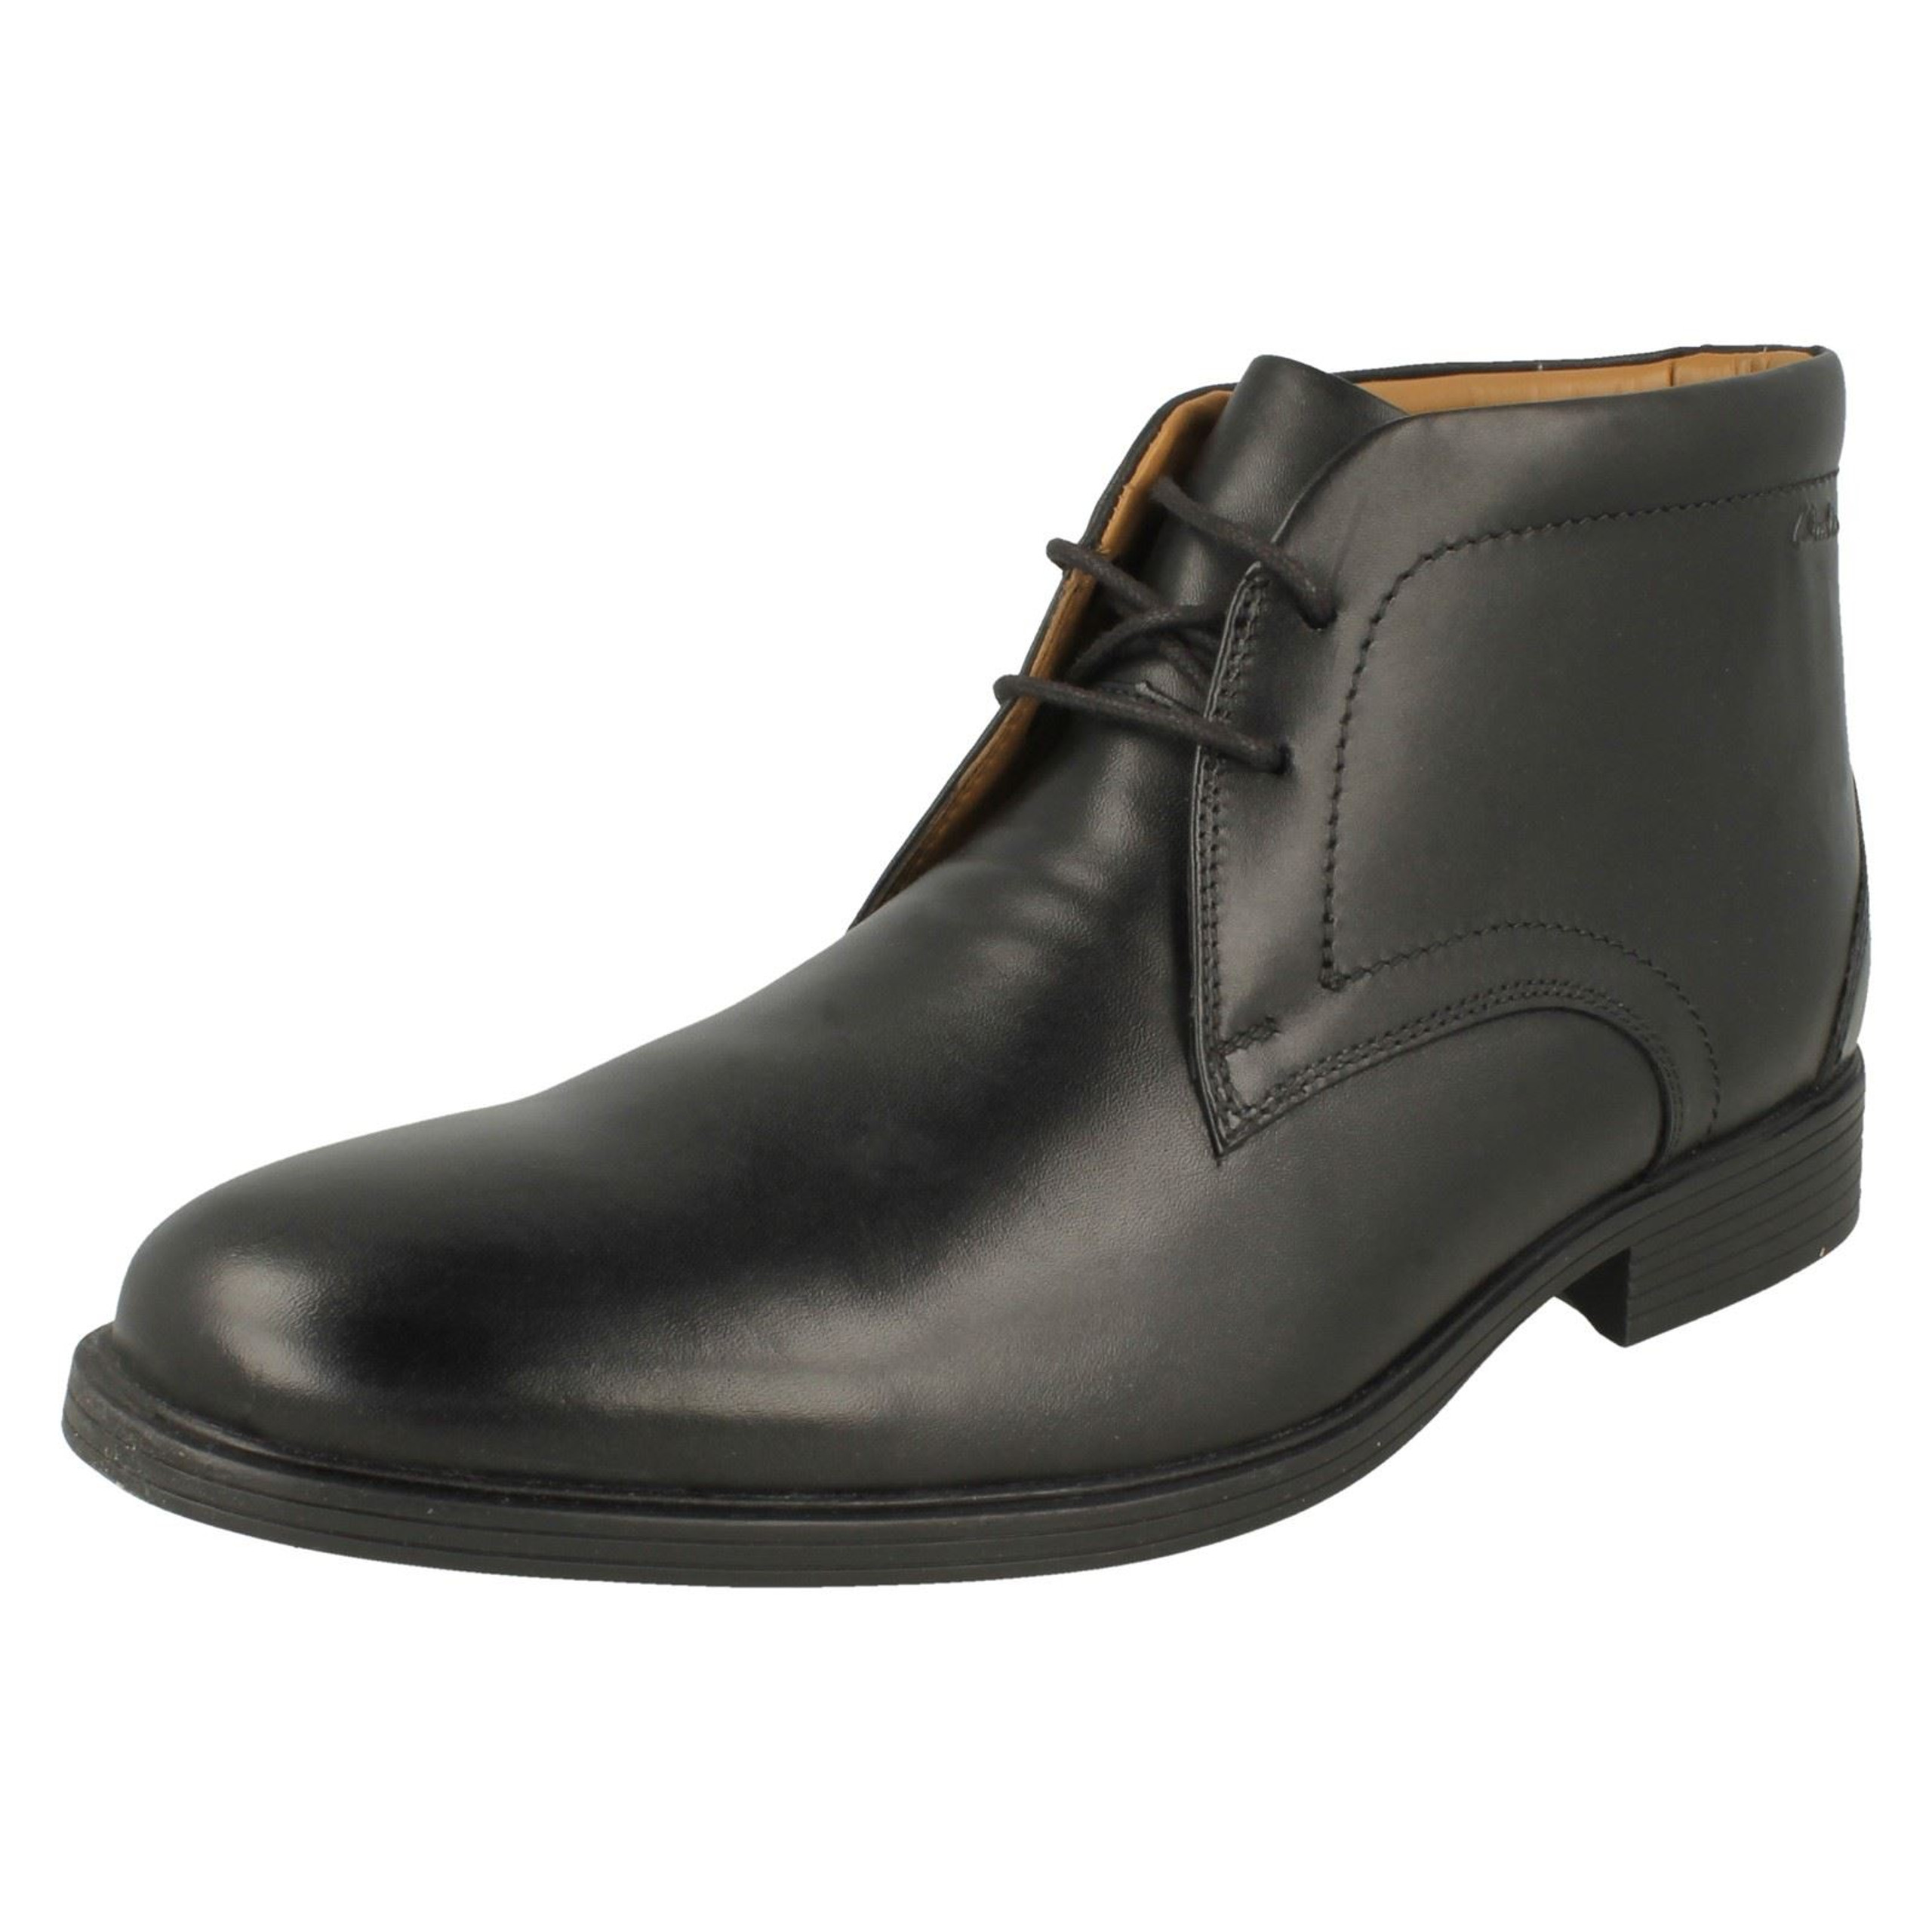 Mens Clarks Lace Up Chukka Style Boots - Whiddon Mid